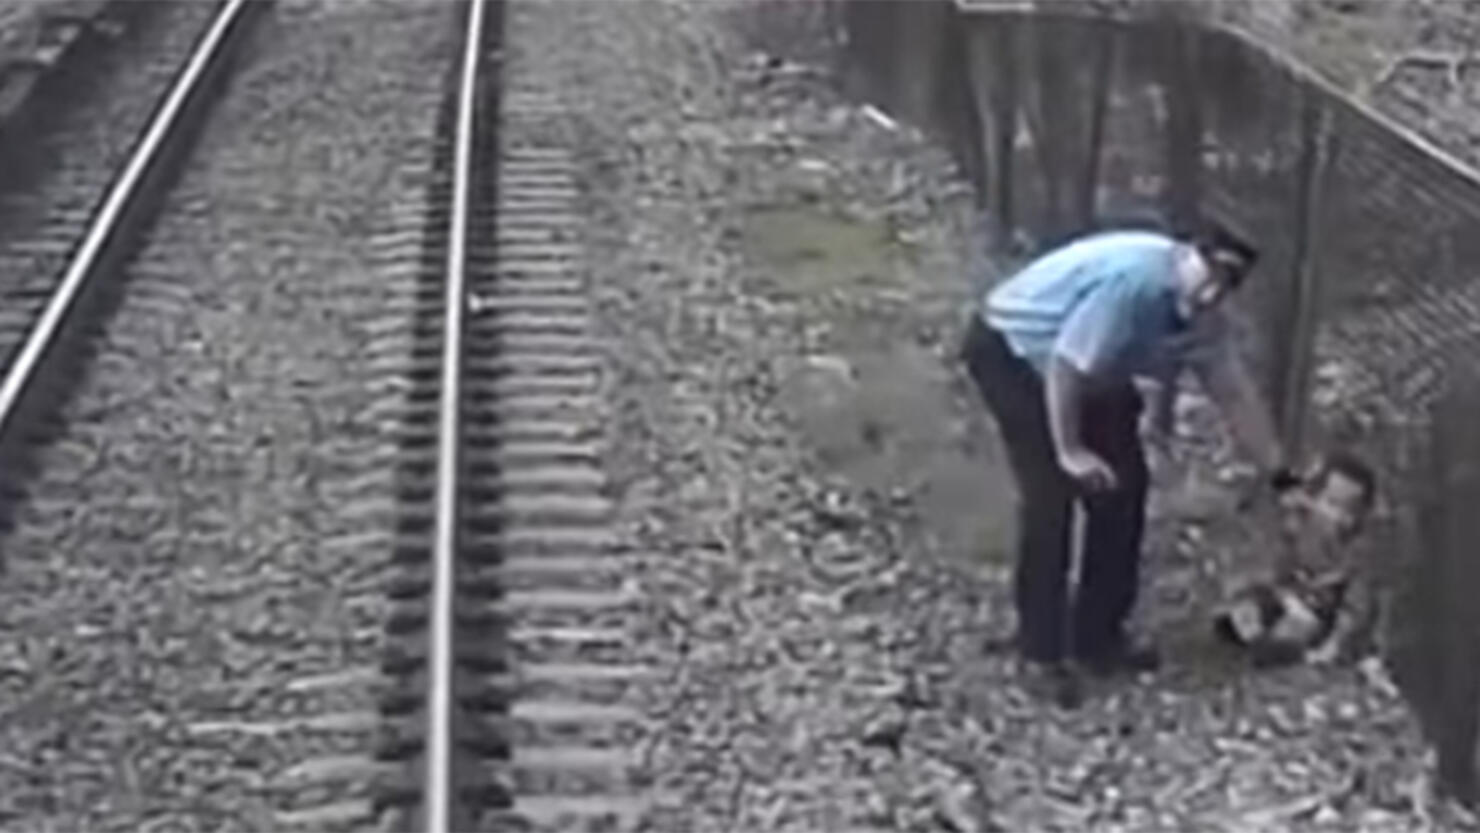 Train conductor rescues toddler